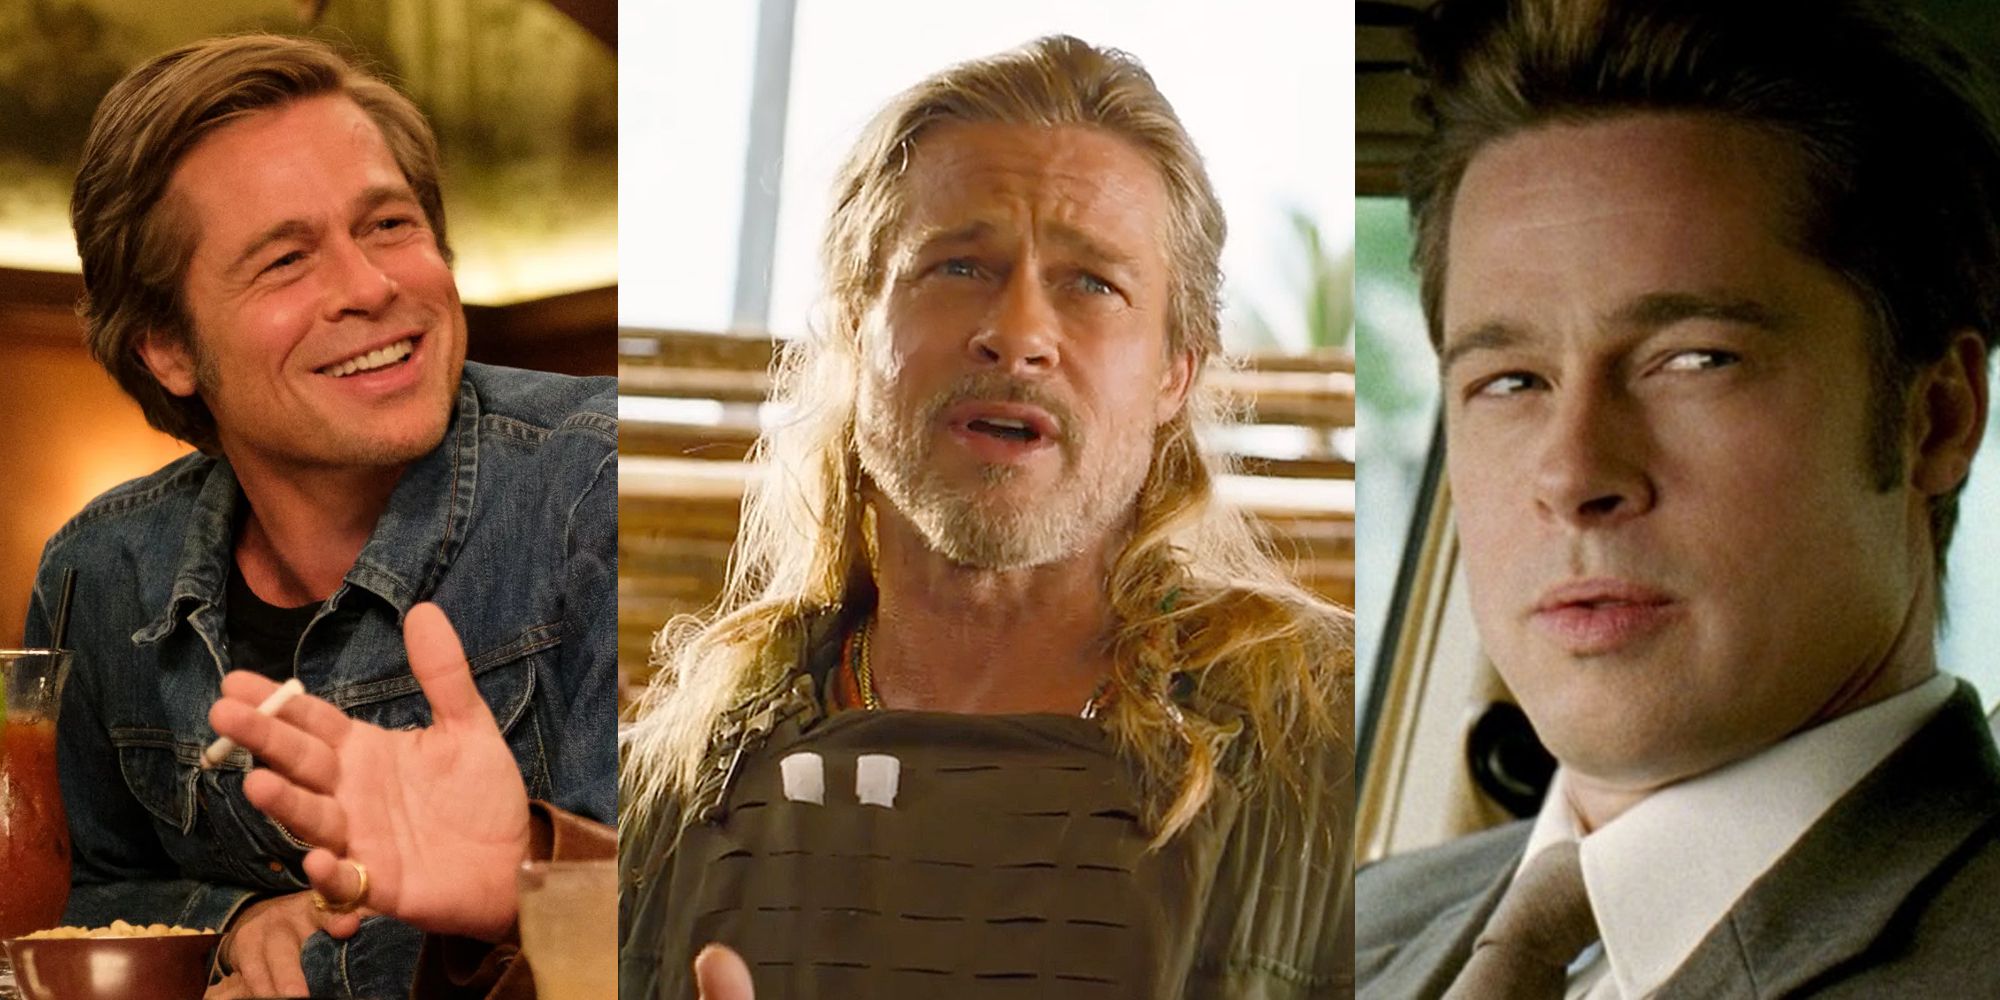 Cliff Booth at a bar with Rick Dalton; Brad Pitt in The Lost City; Chad in a suit pretending to be mysterious